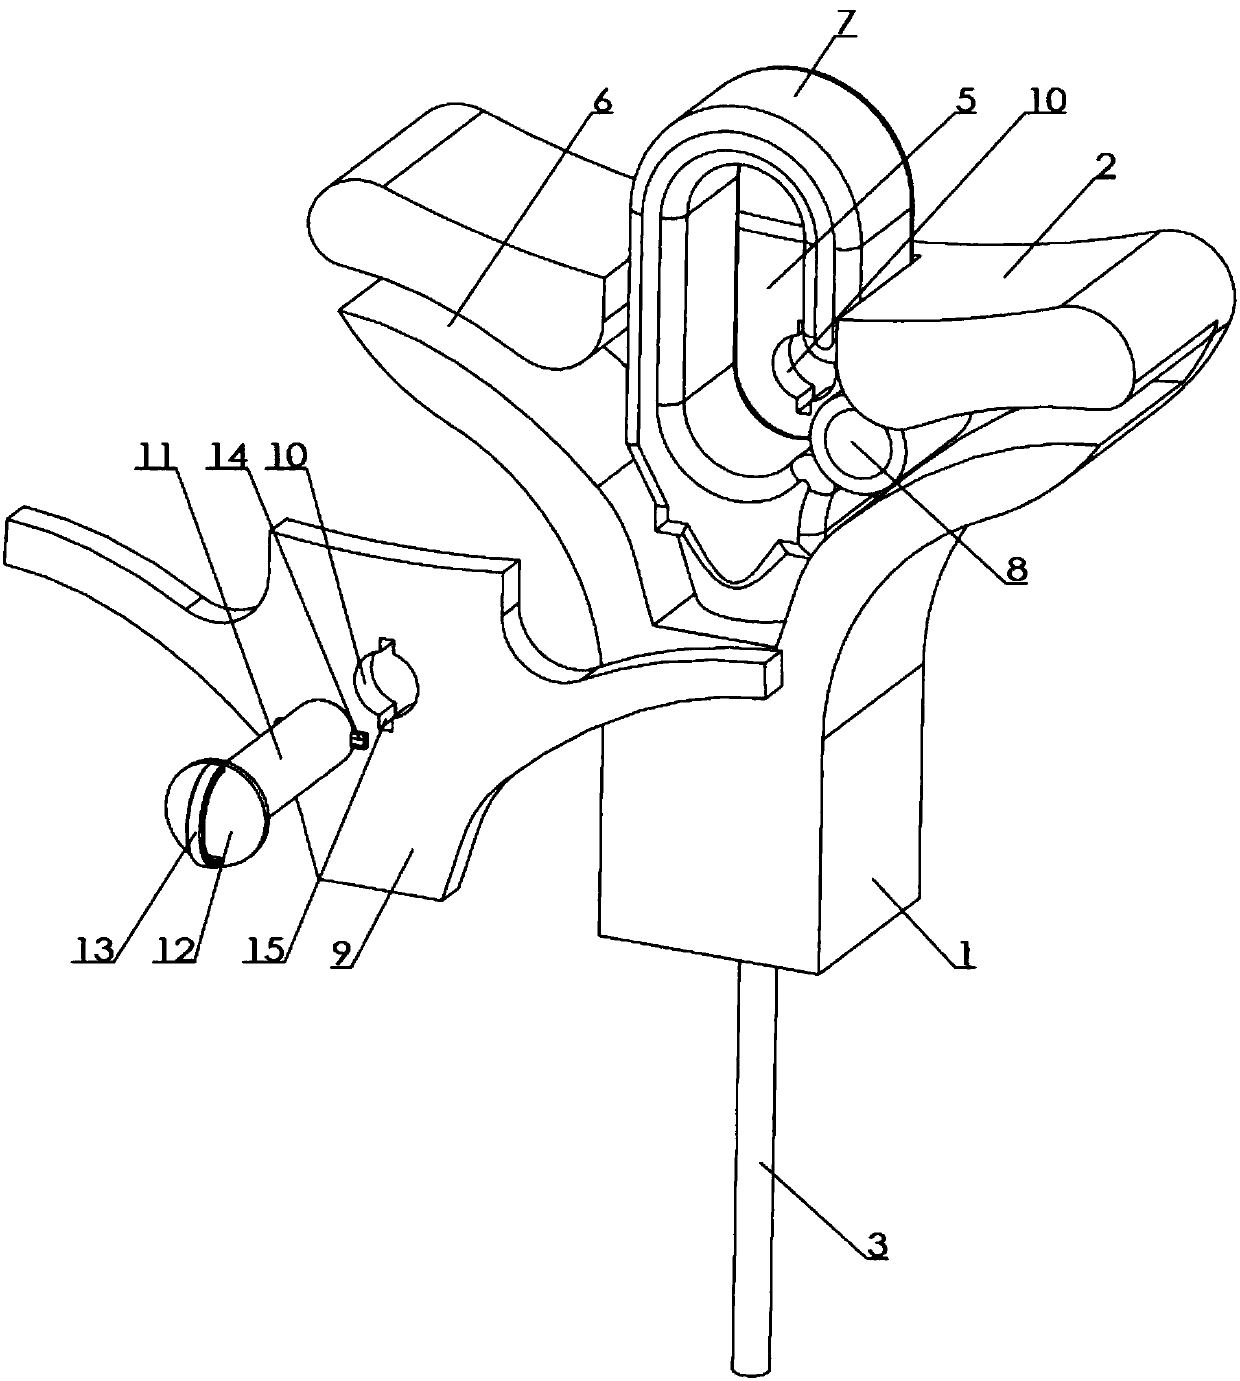 Vehicle-mounted winch system capable of adjusting direction